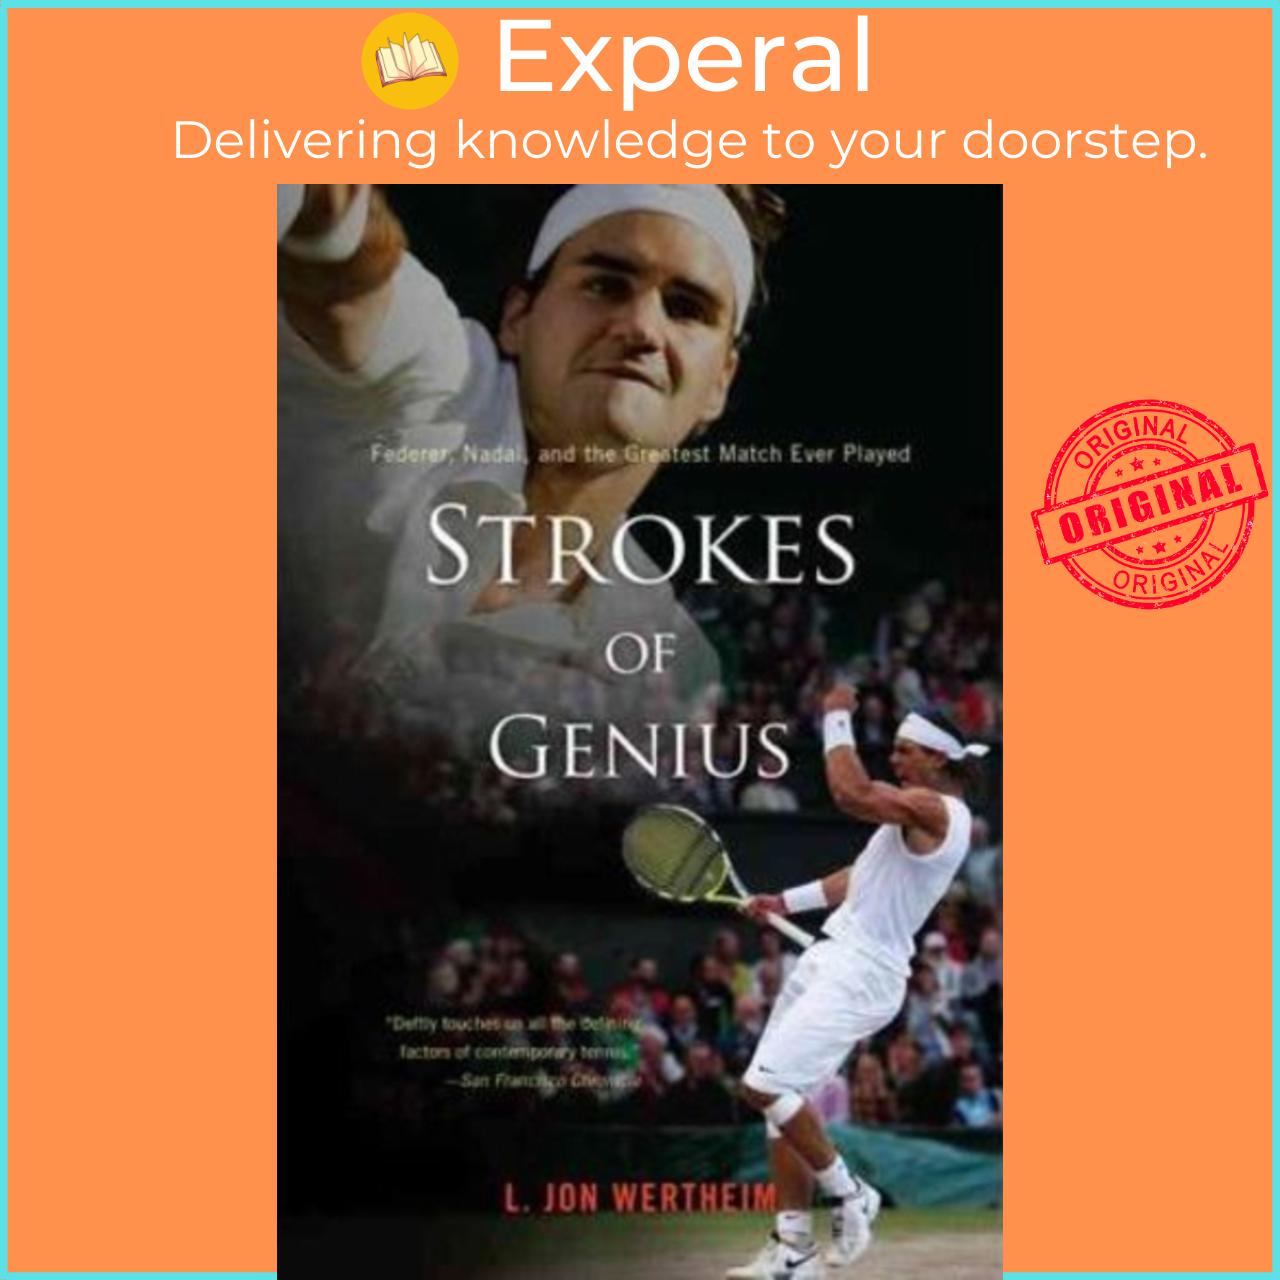 Sách - Strokes of Genius : Federer, Nadal, and the Greatest Match Ever Played by L Jon Wertheim (US edition, paperback)